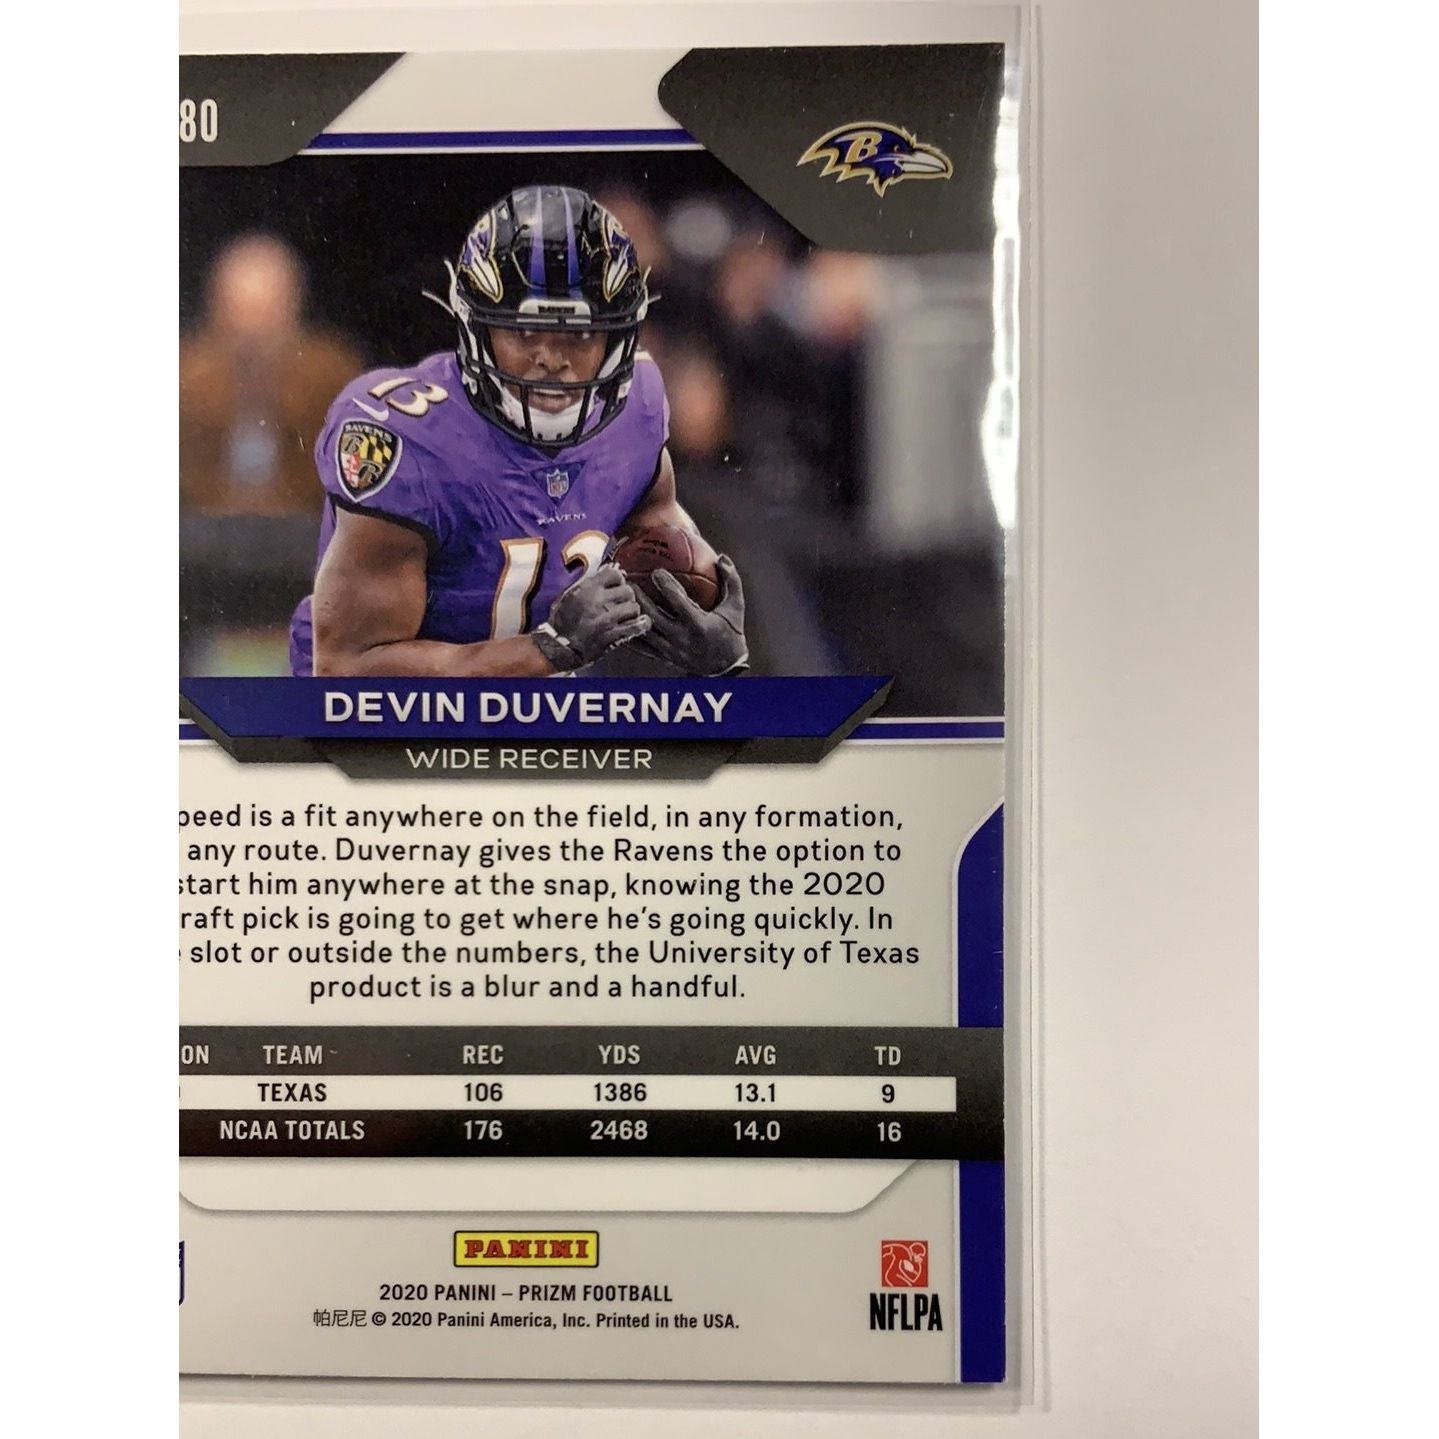  2020 Panini Prizm Devin Duvernay RC  Local Legends Cards & Collectibles